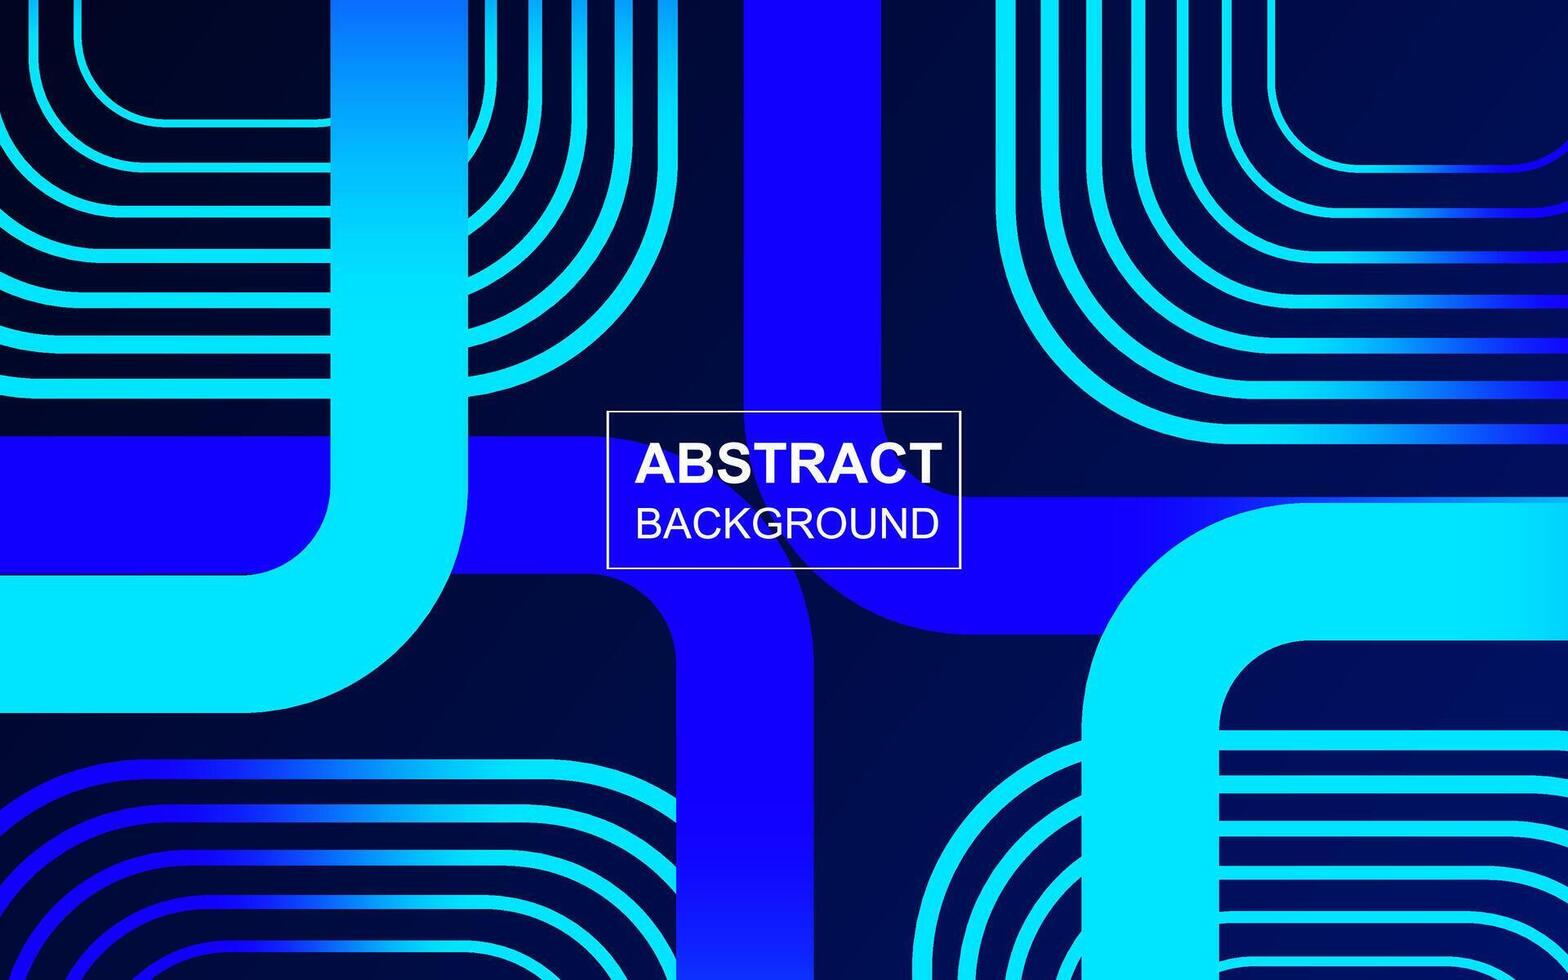 Modern futuristic blue gradient shapes geometric abstract background design. Vector illustration